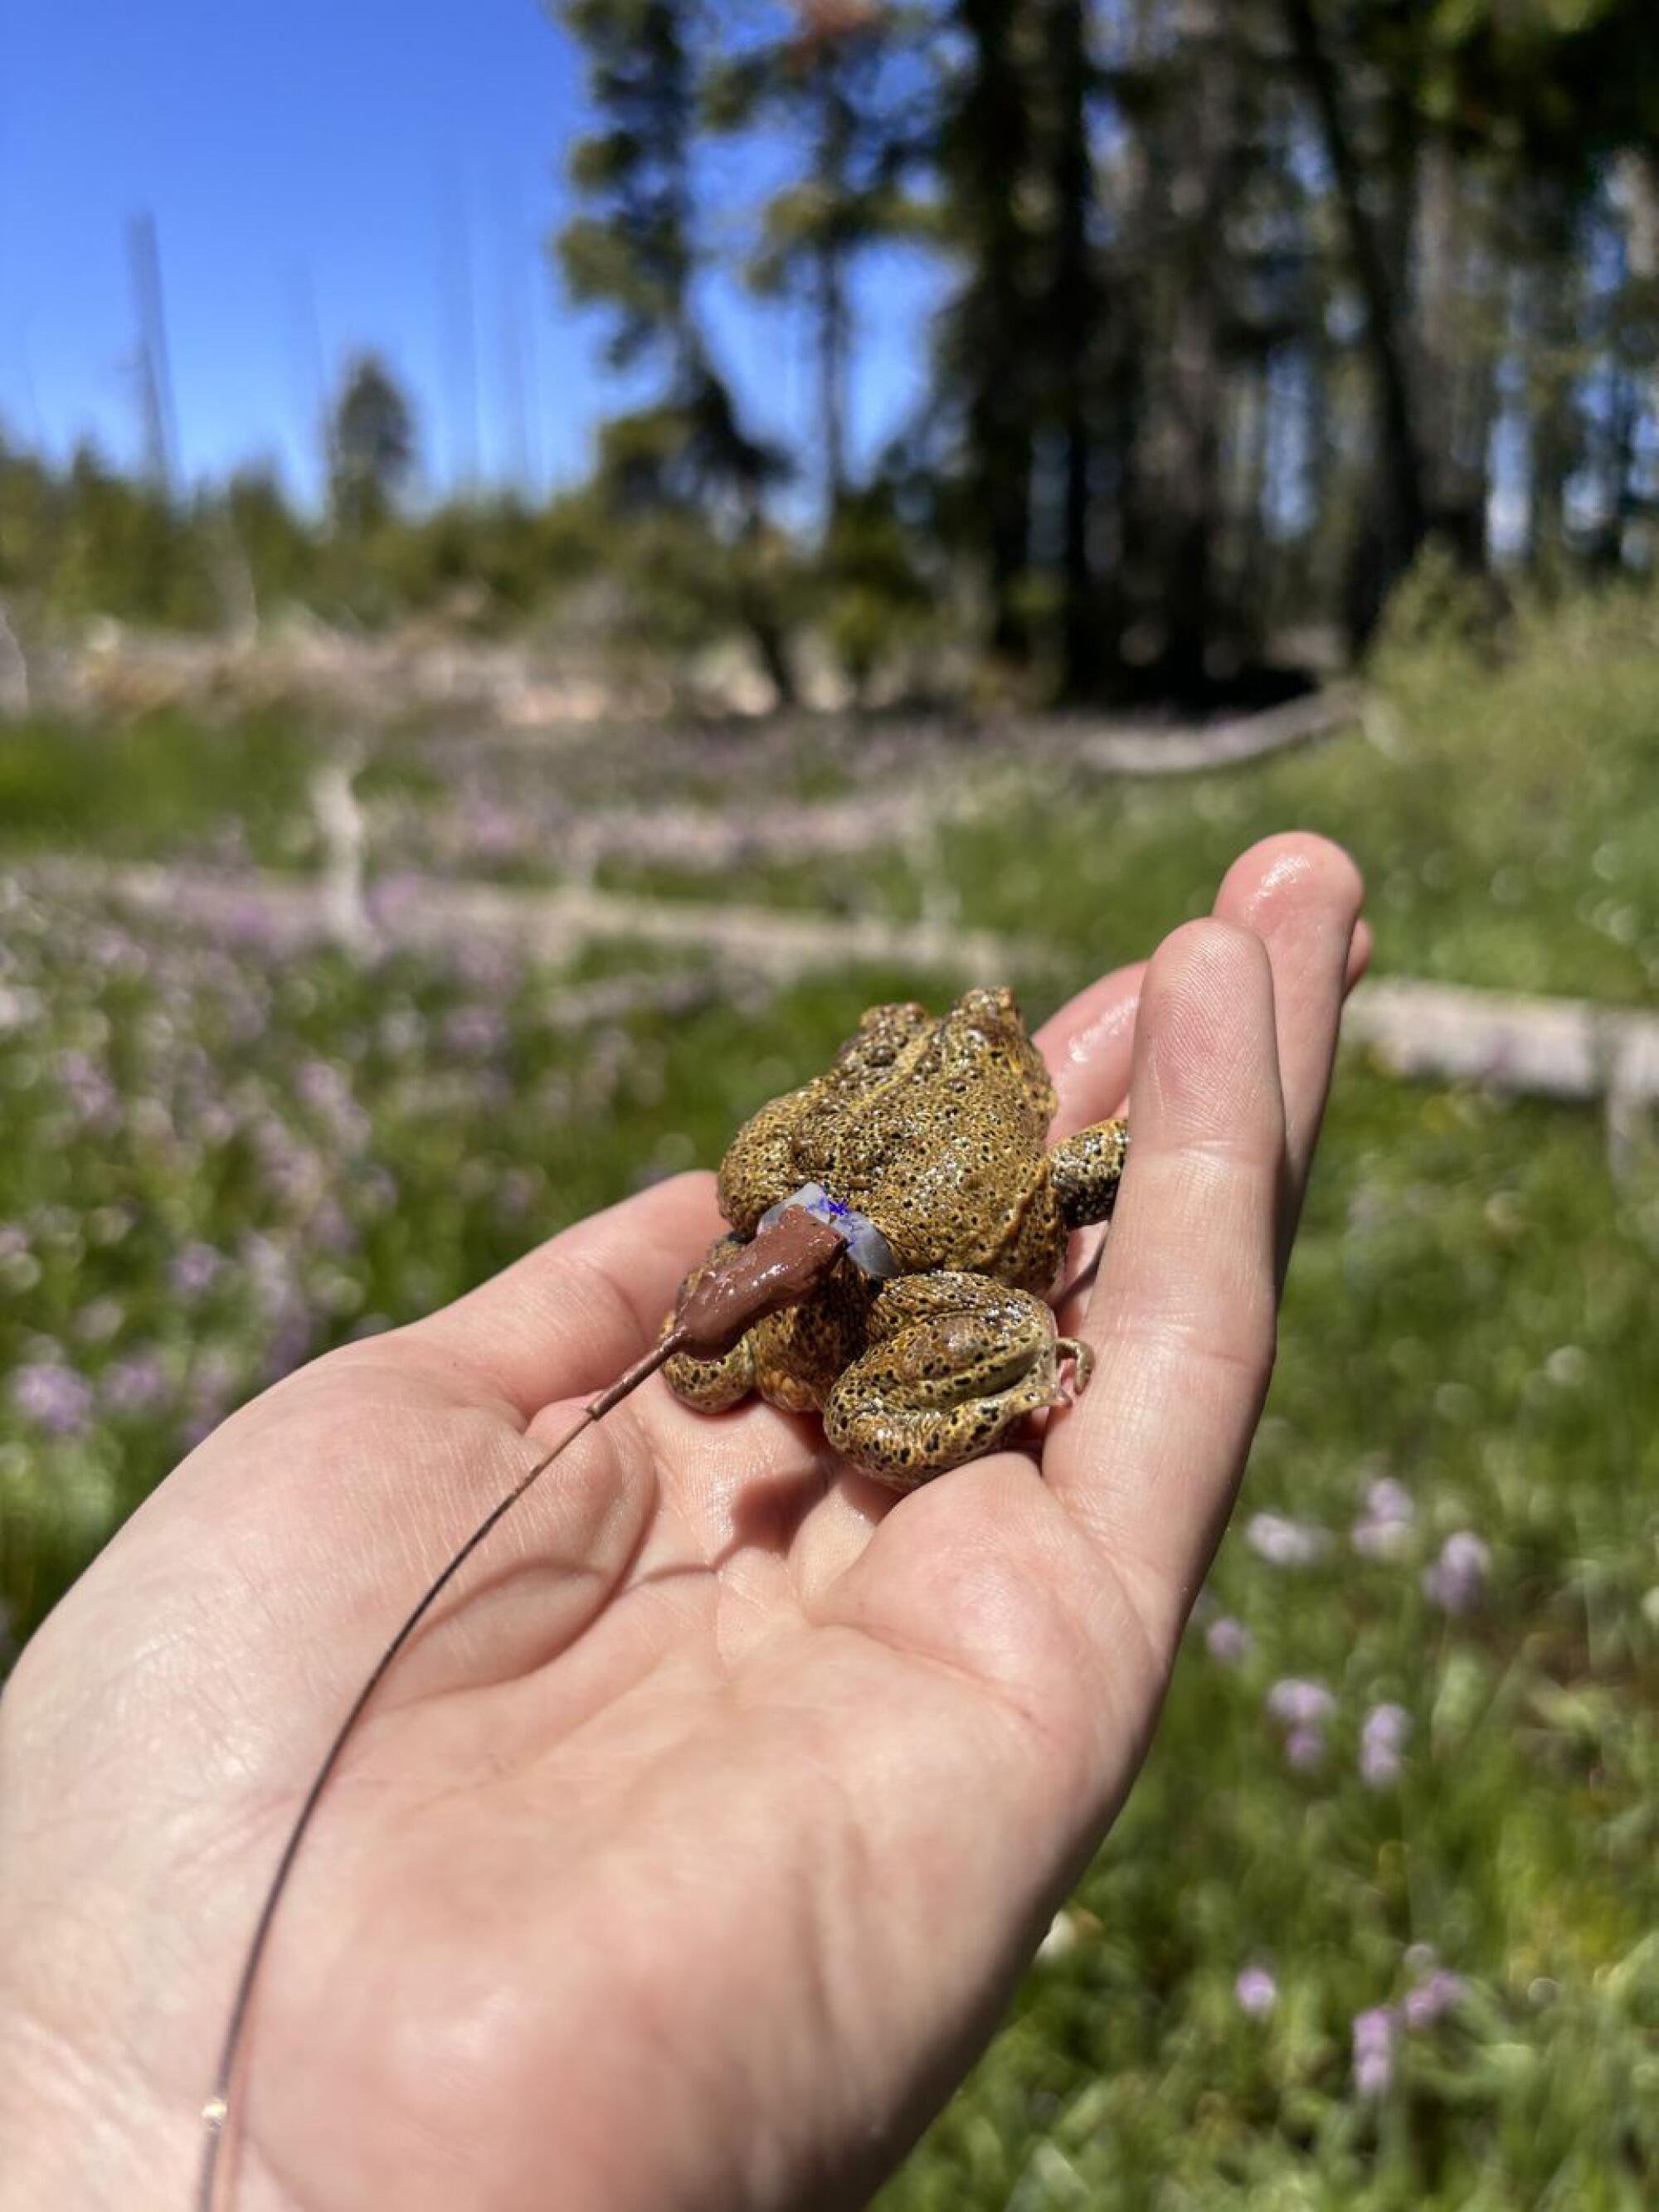 A Yosemite toad in a person's hand